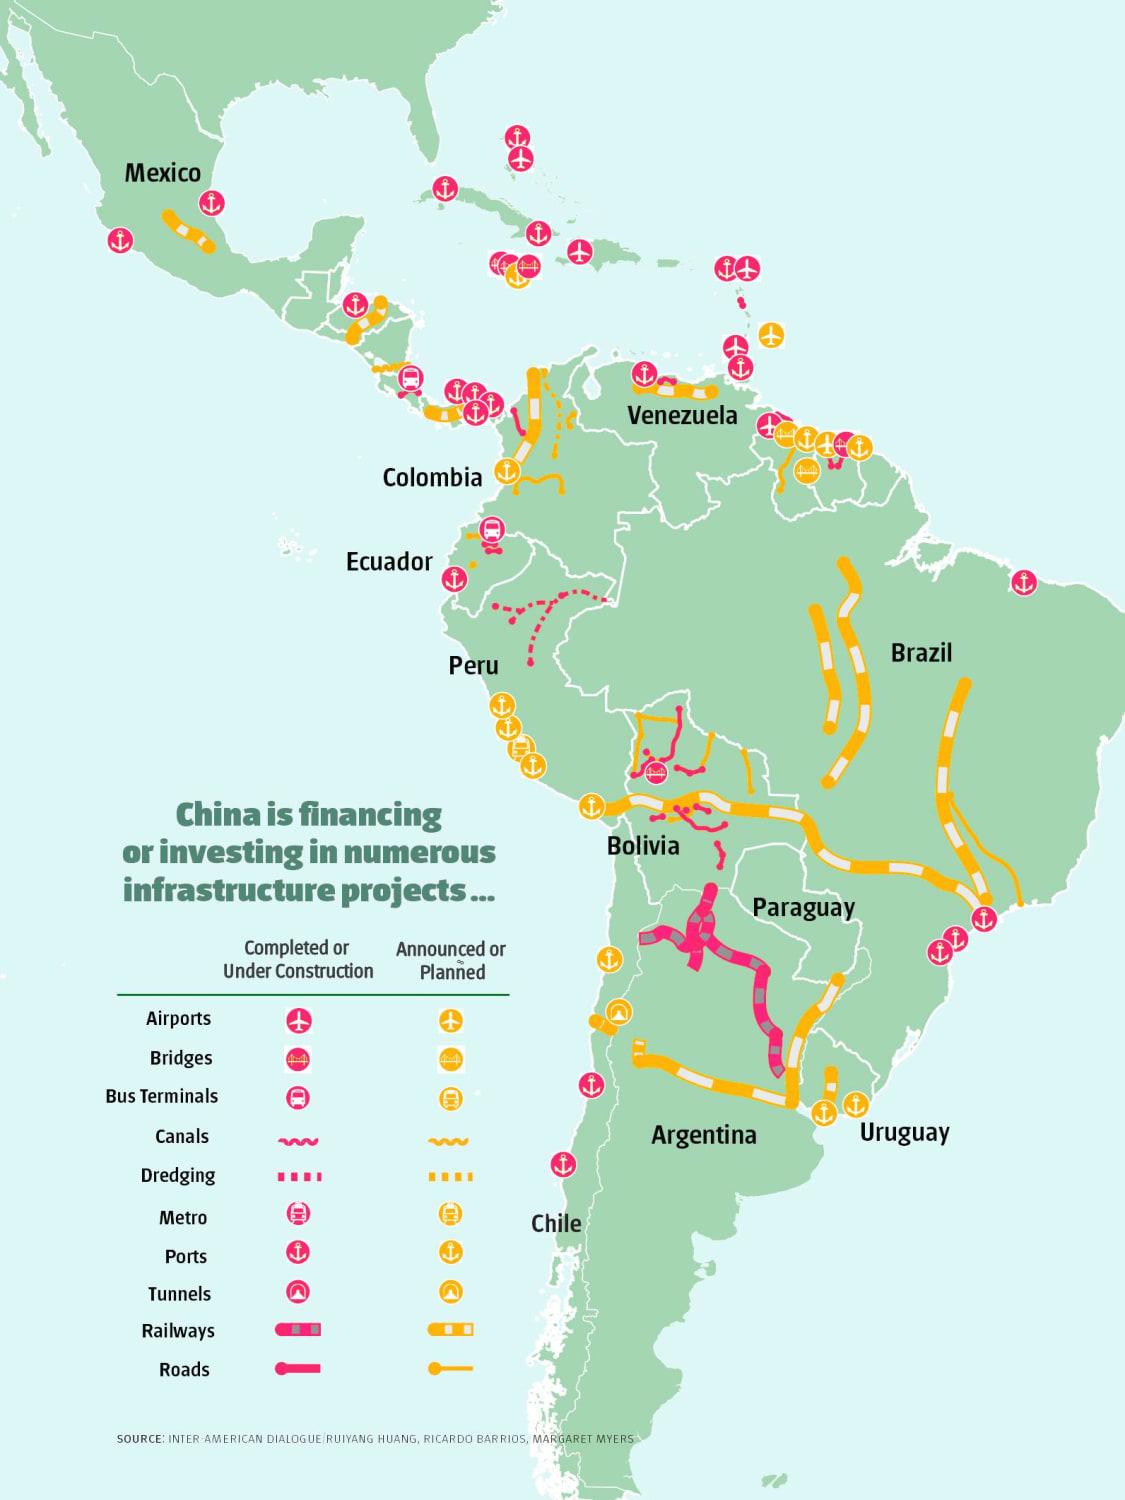 Chinese Infrastructure Projects in Latin America and the Caribbean